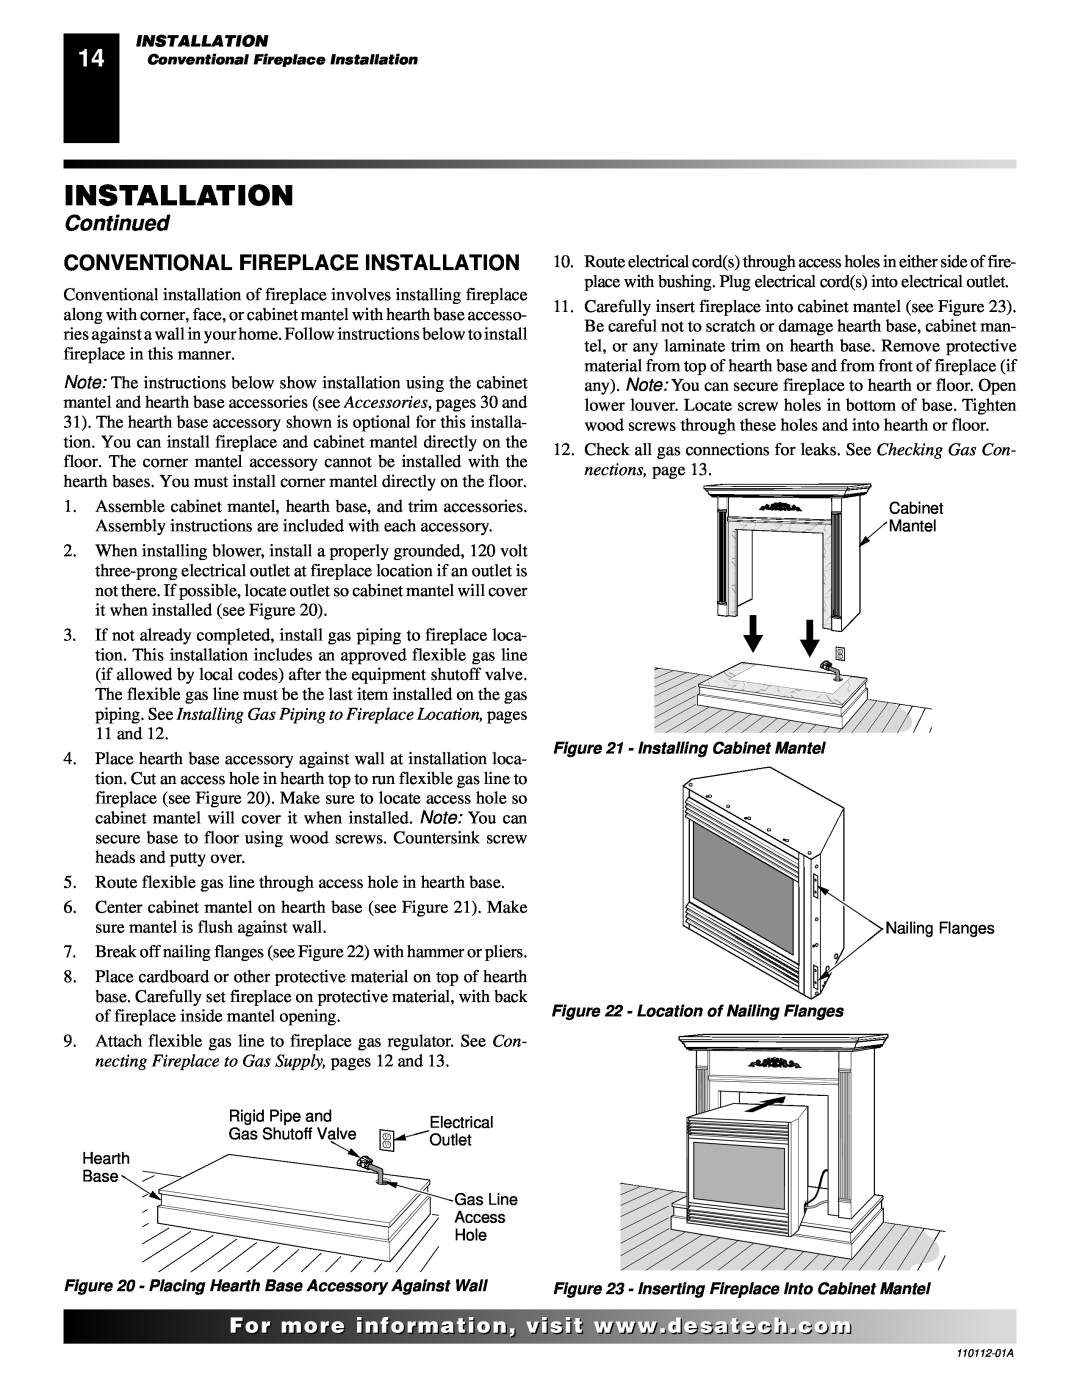 Desa VTGF33NRA installation manual Conventional Fireplace Installation, Continued, For..com 